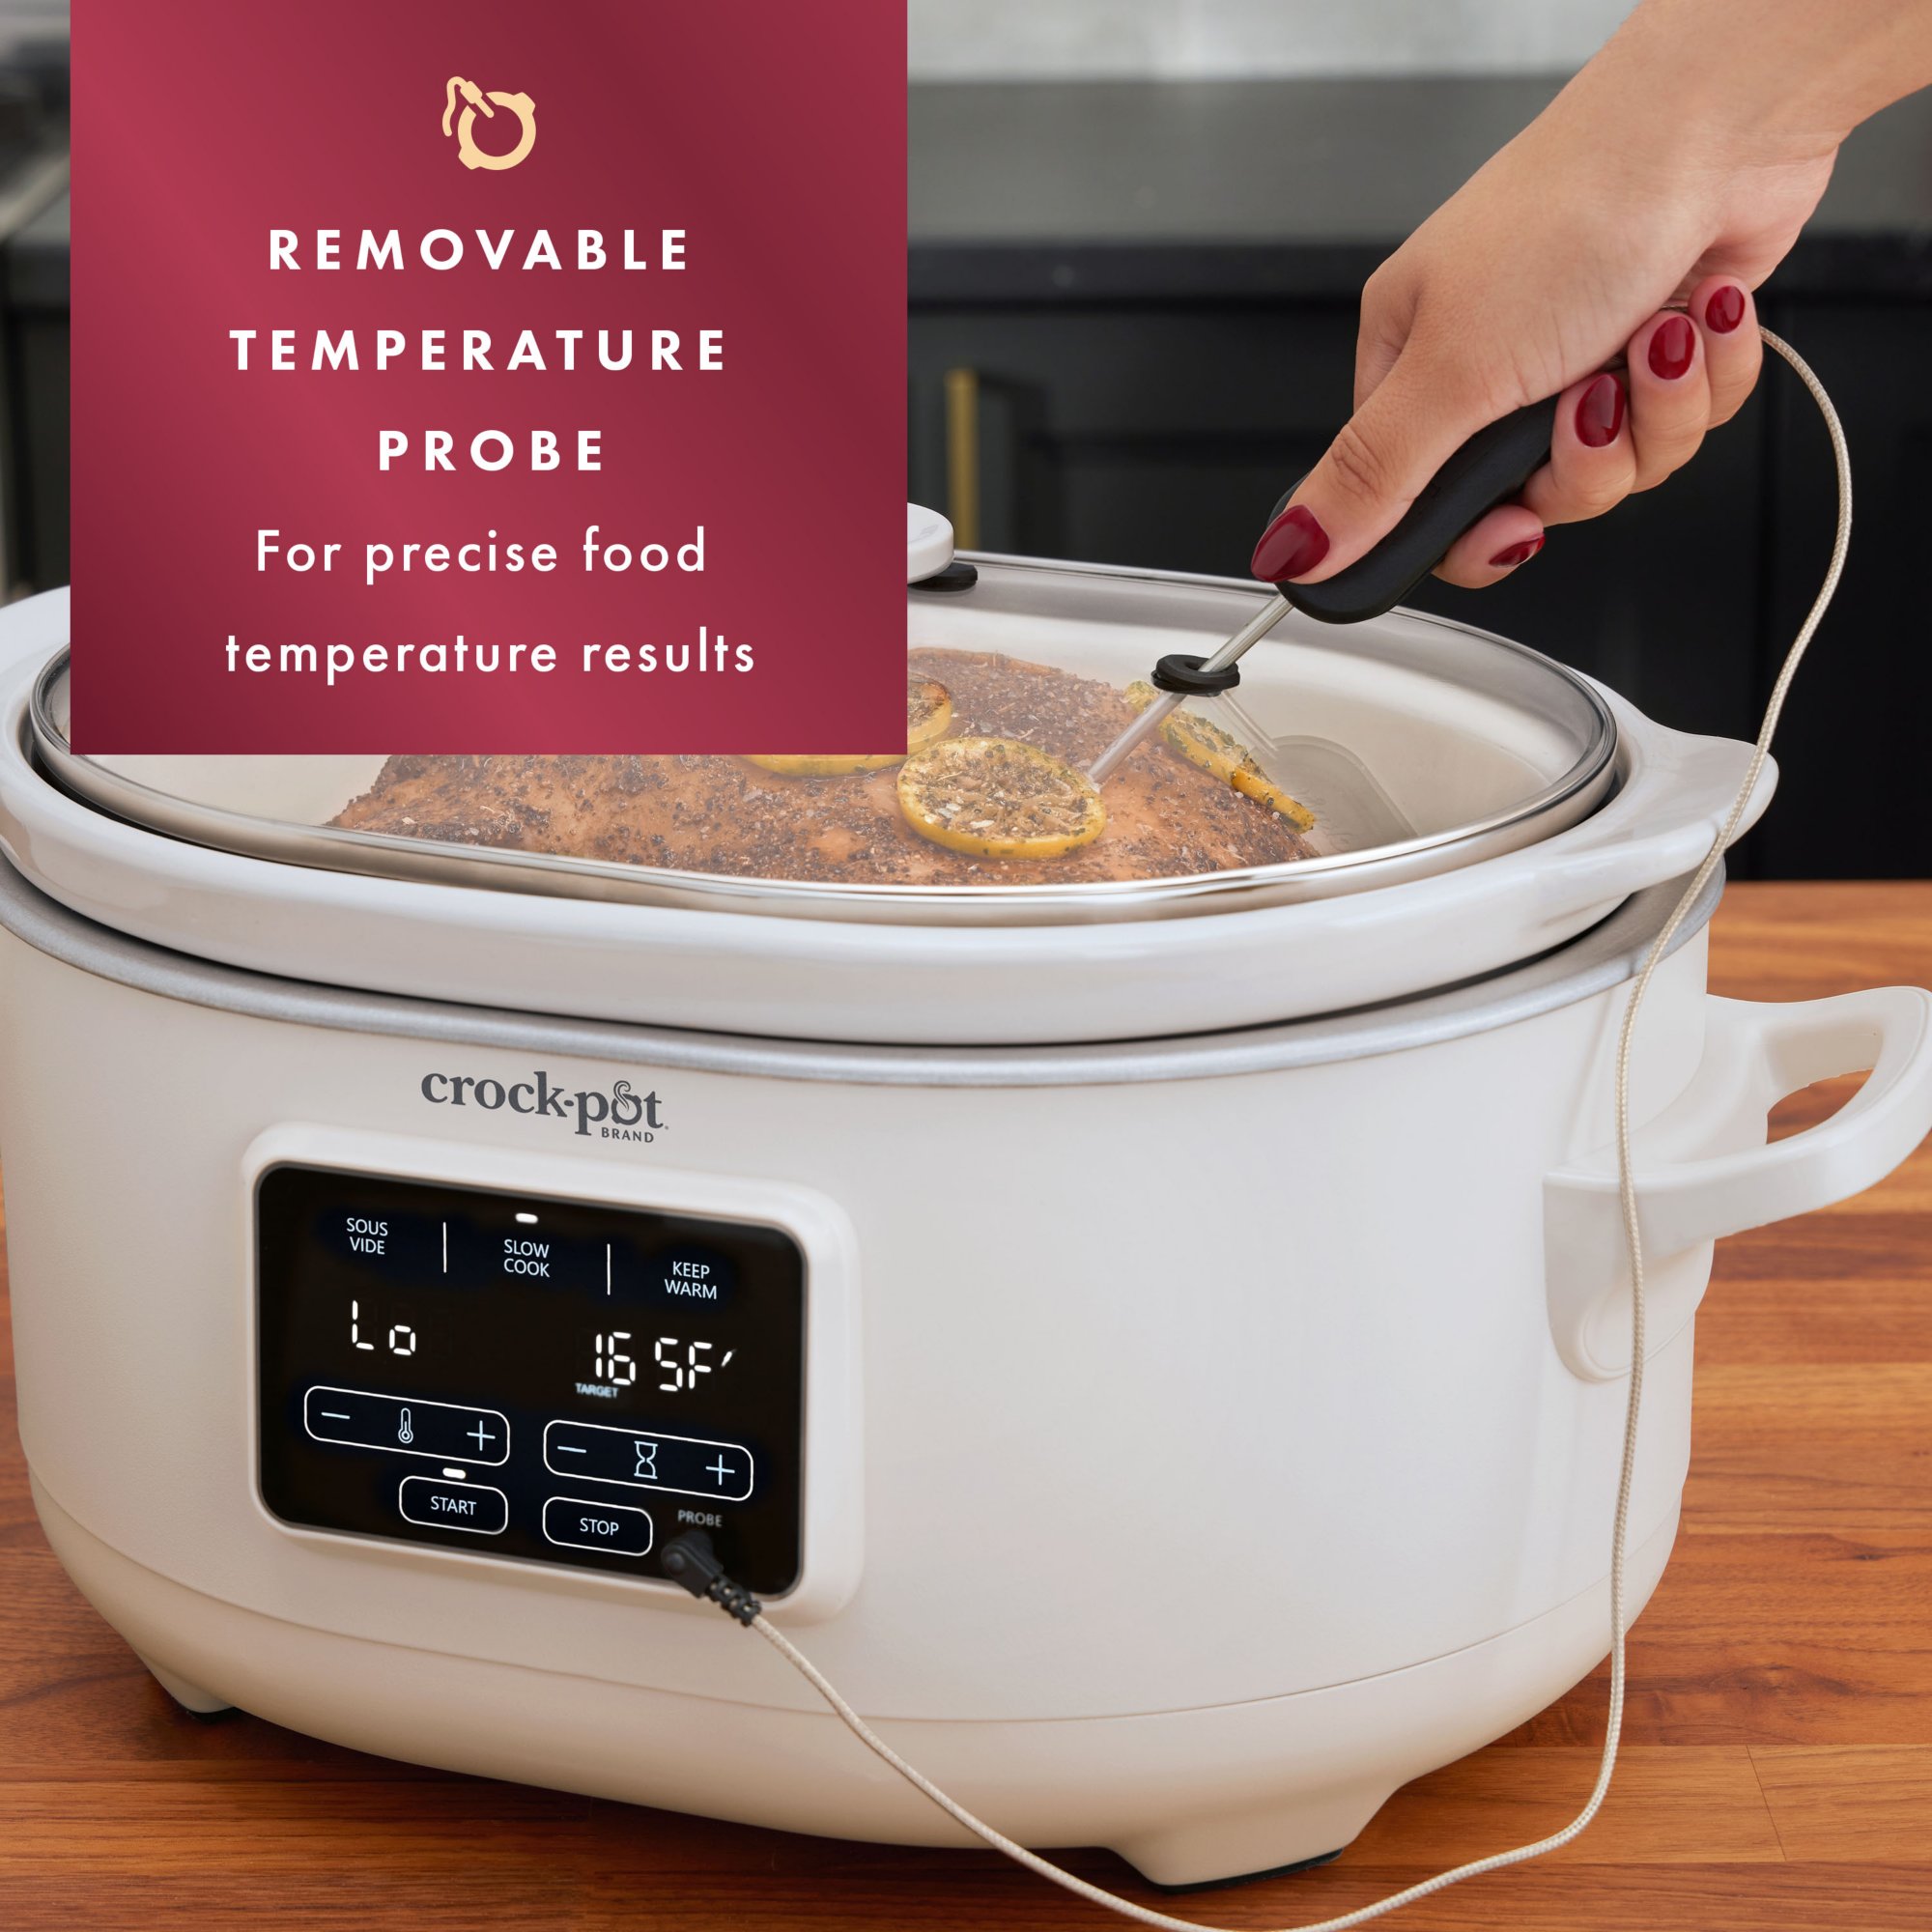 Adding Temperature Control to an On/Off Crock-Pot